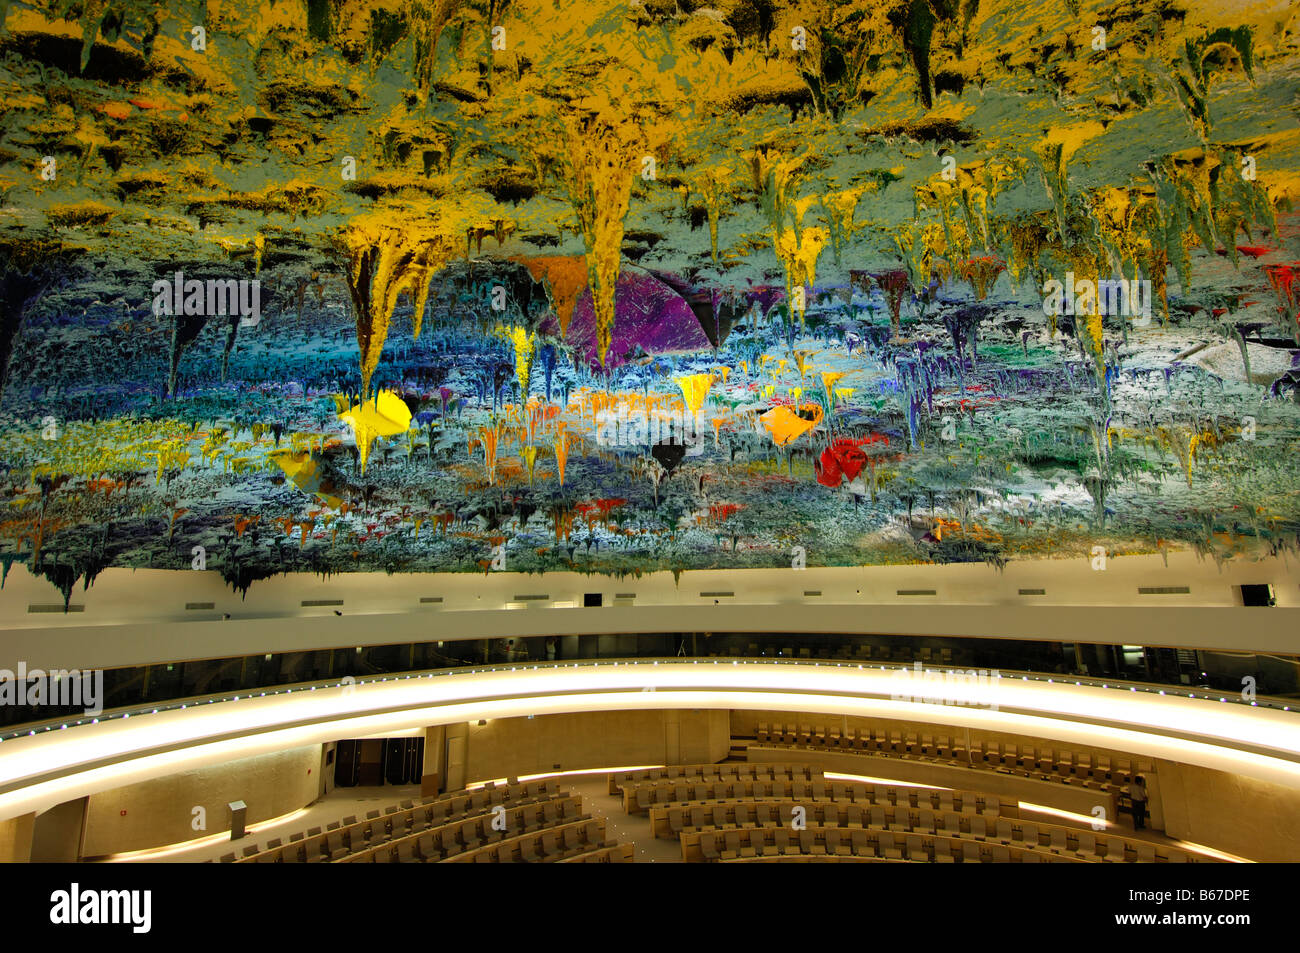 Human Rights and Alliance of Civilization room, ceiling sculpture by Miquel Barceló, UNO, Palais des Nations Geneva Switzerlan Stock Photo